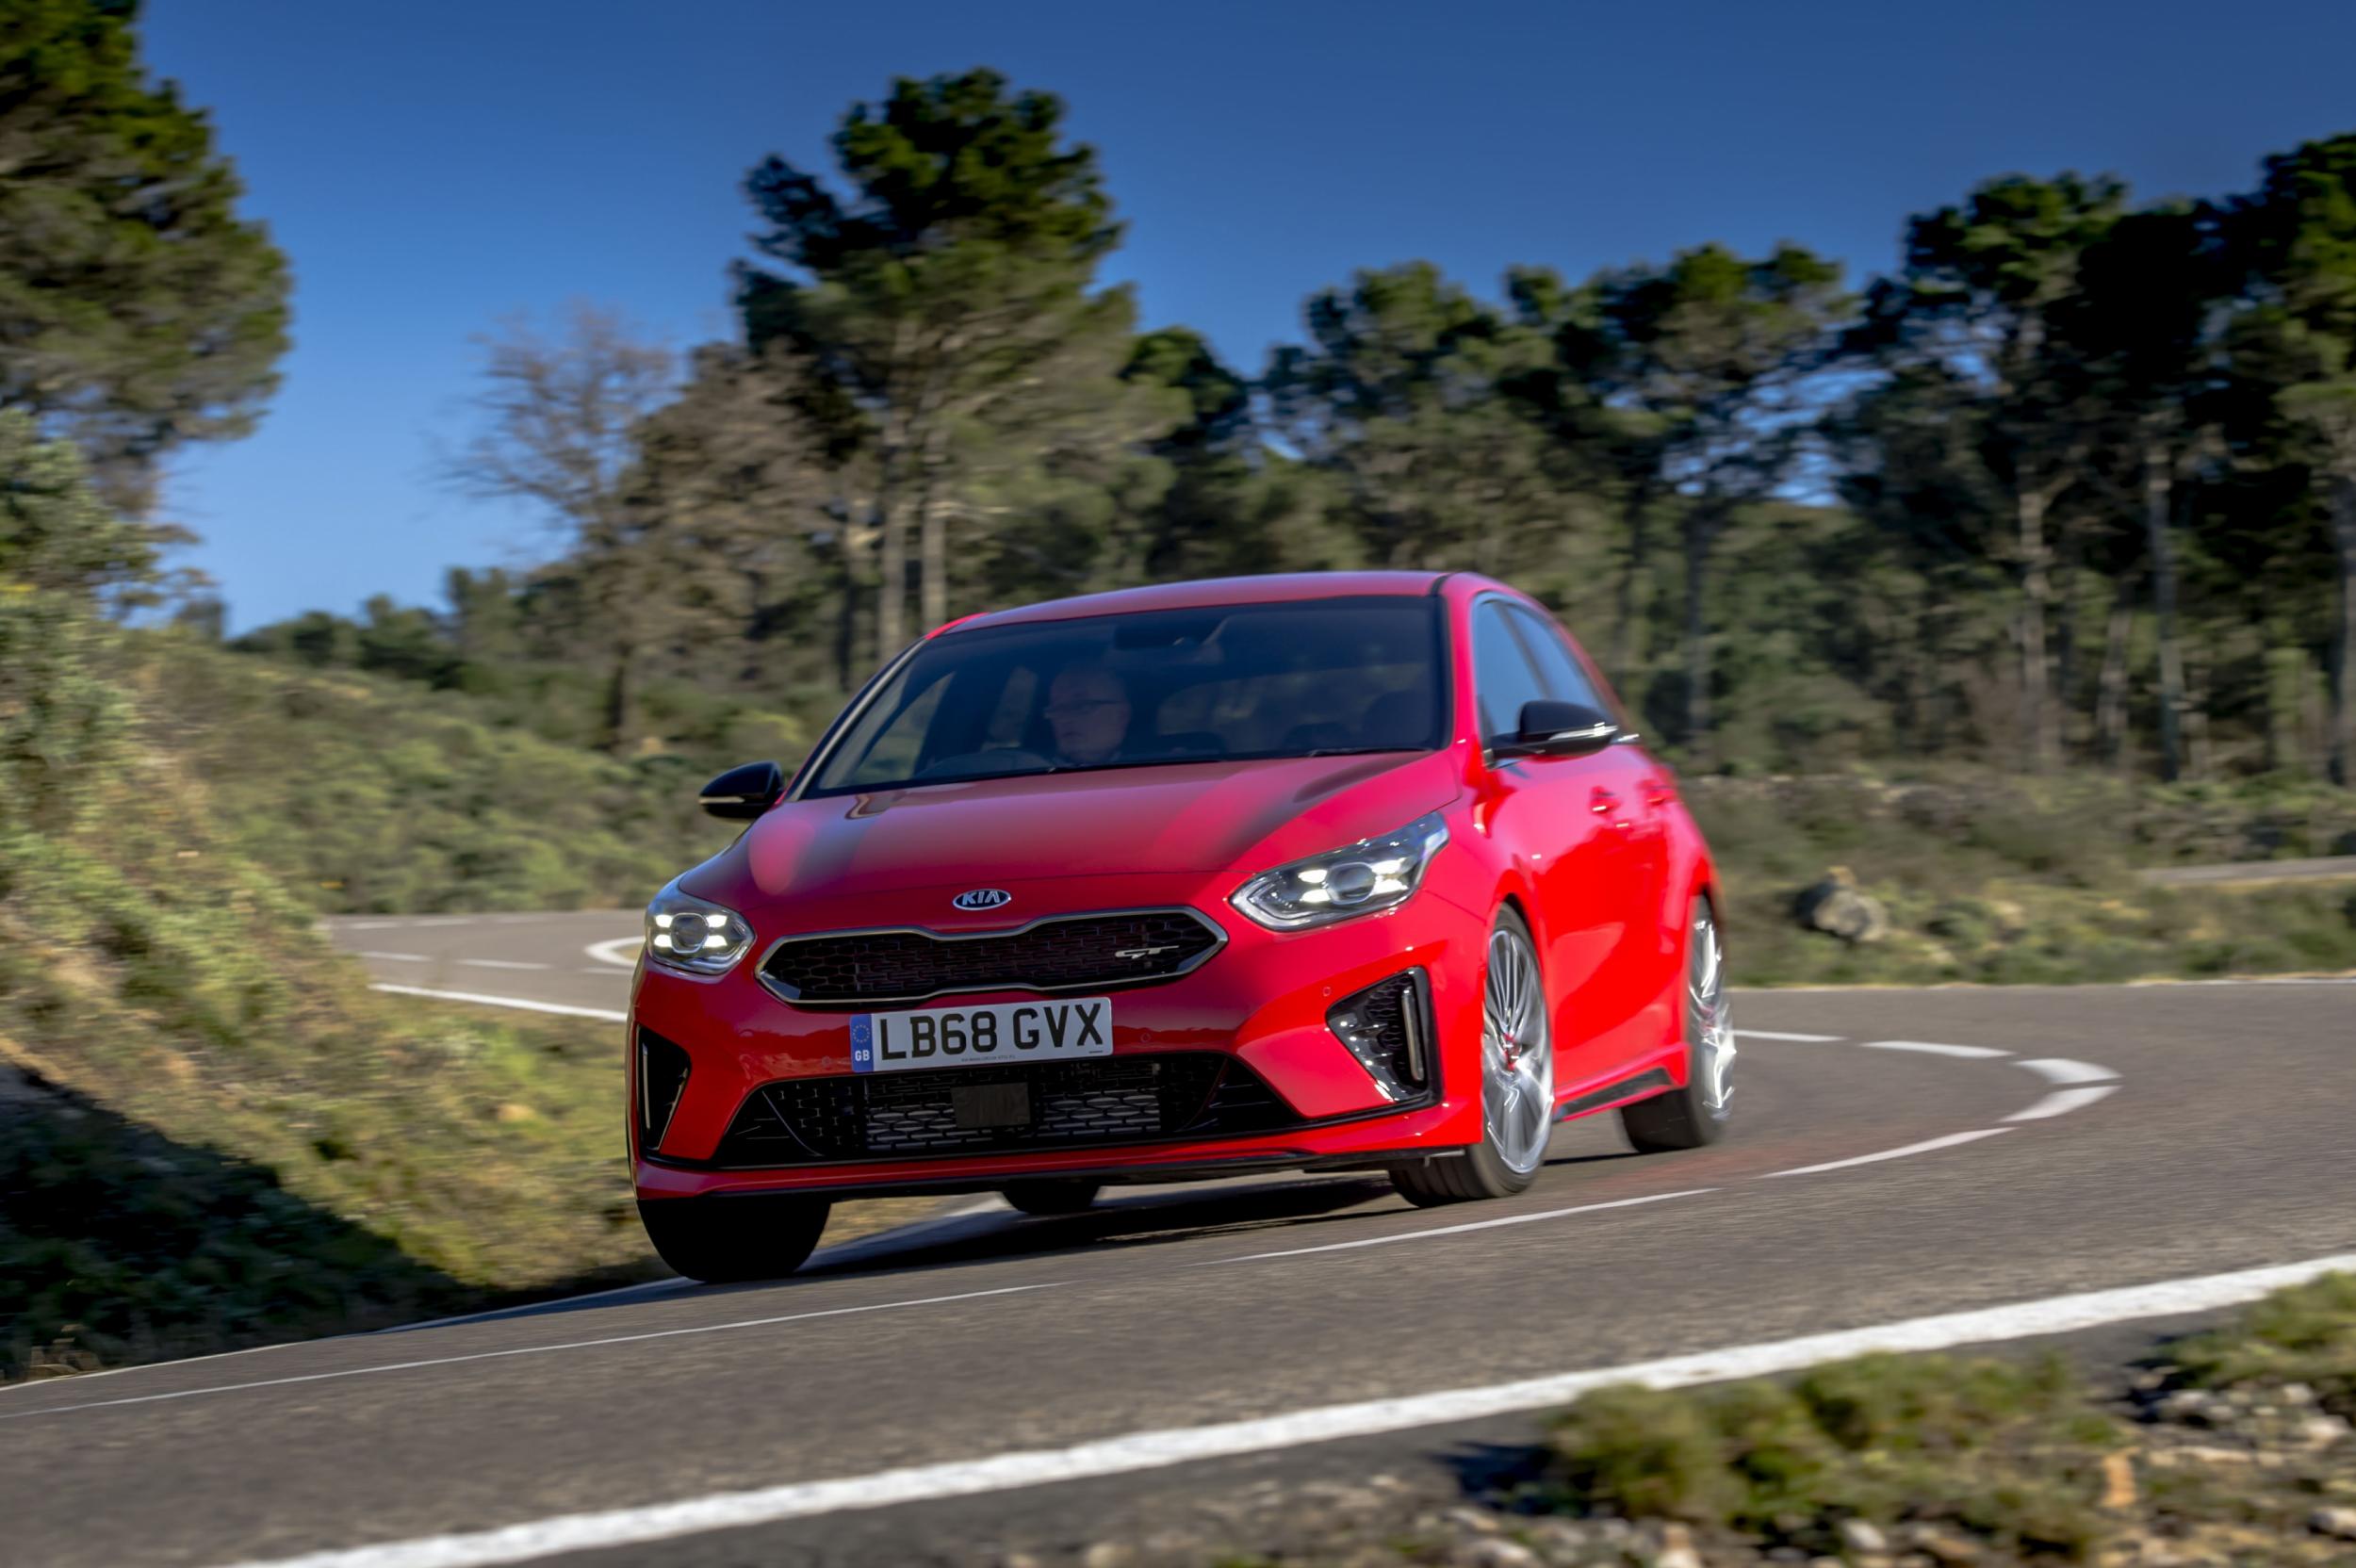 The smooth, mildly tuned four-cylinder 1.6 litre 200 horsepower unit will take your Kia all the way to 143mph